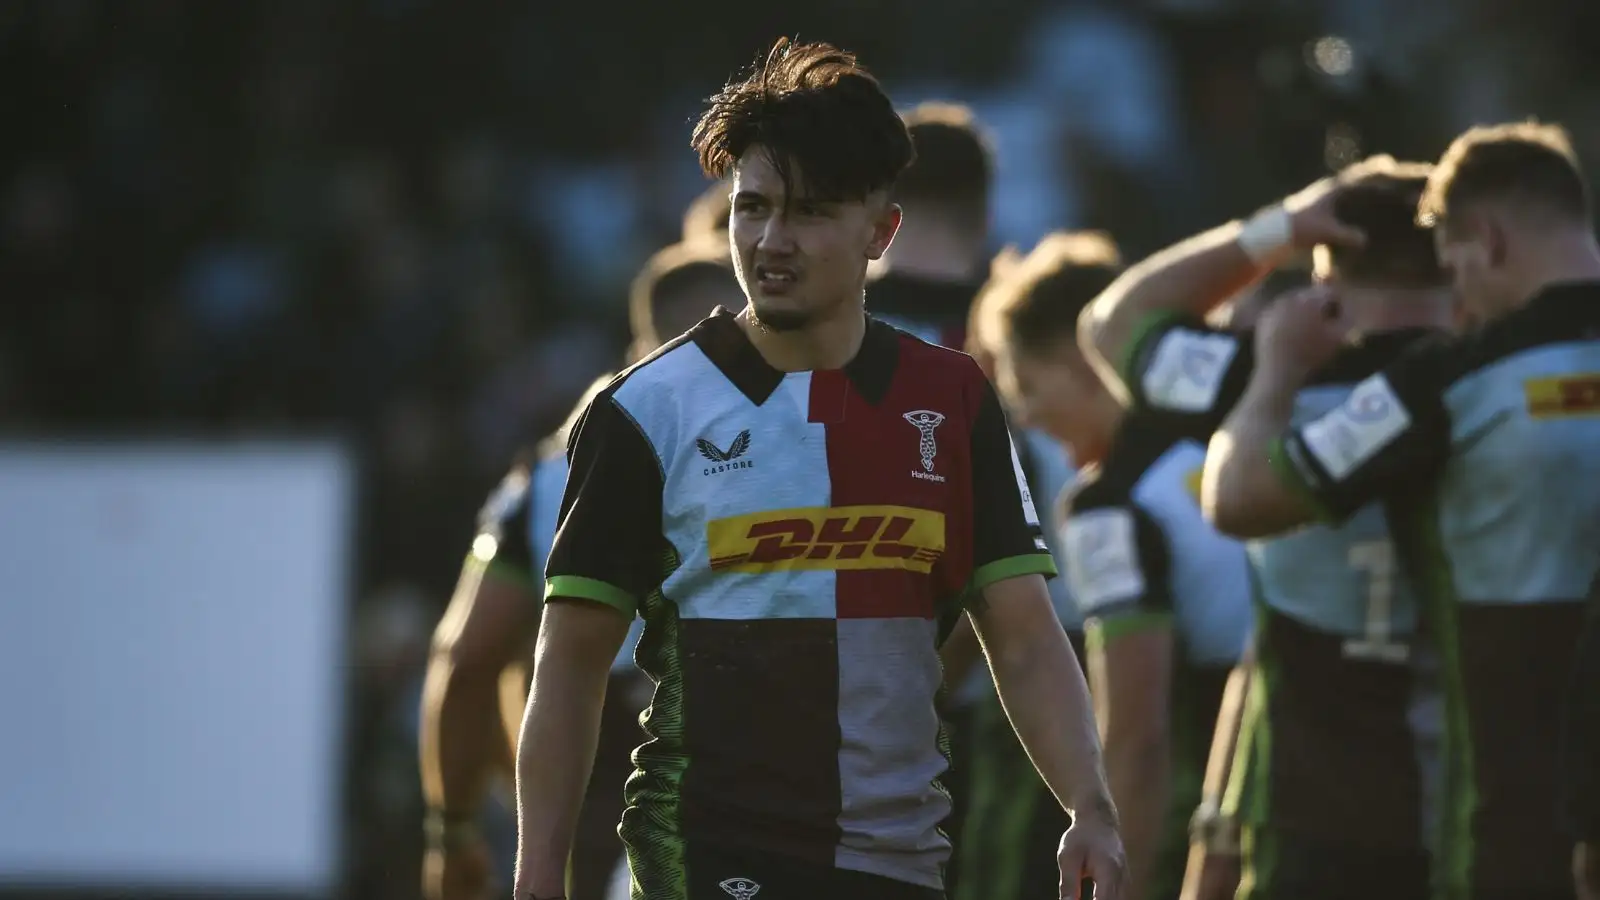 Marcus Smith is on the brink of becoming a world-class flyhalf, according to Harlequins boss Tabai Matson.  The Quins coach spoke highly of his pivot after watching him steer his side to a 39-29 Champions Cup victory over a Springbok-laden Sharks team.